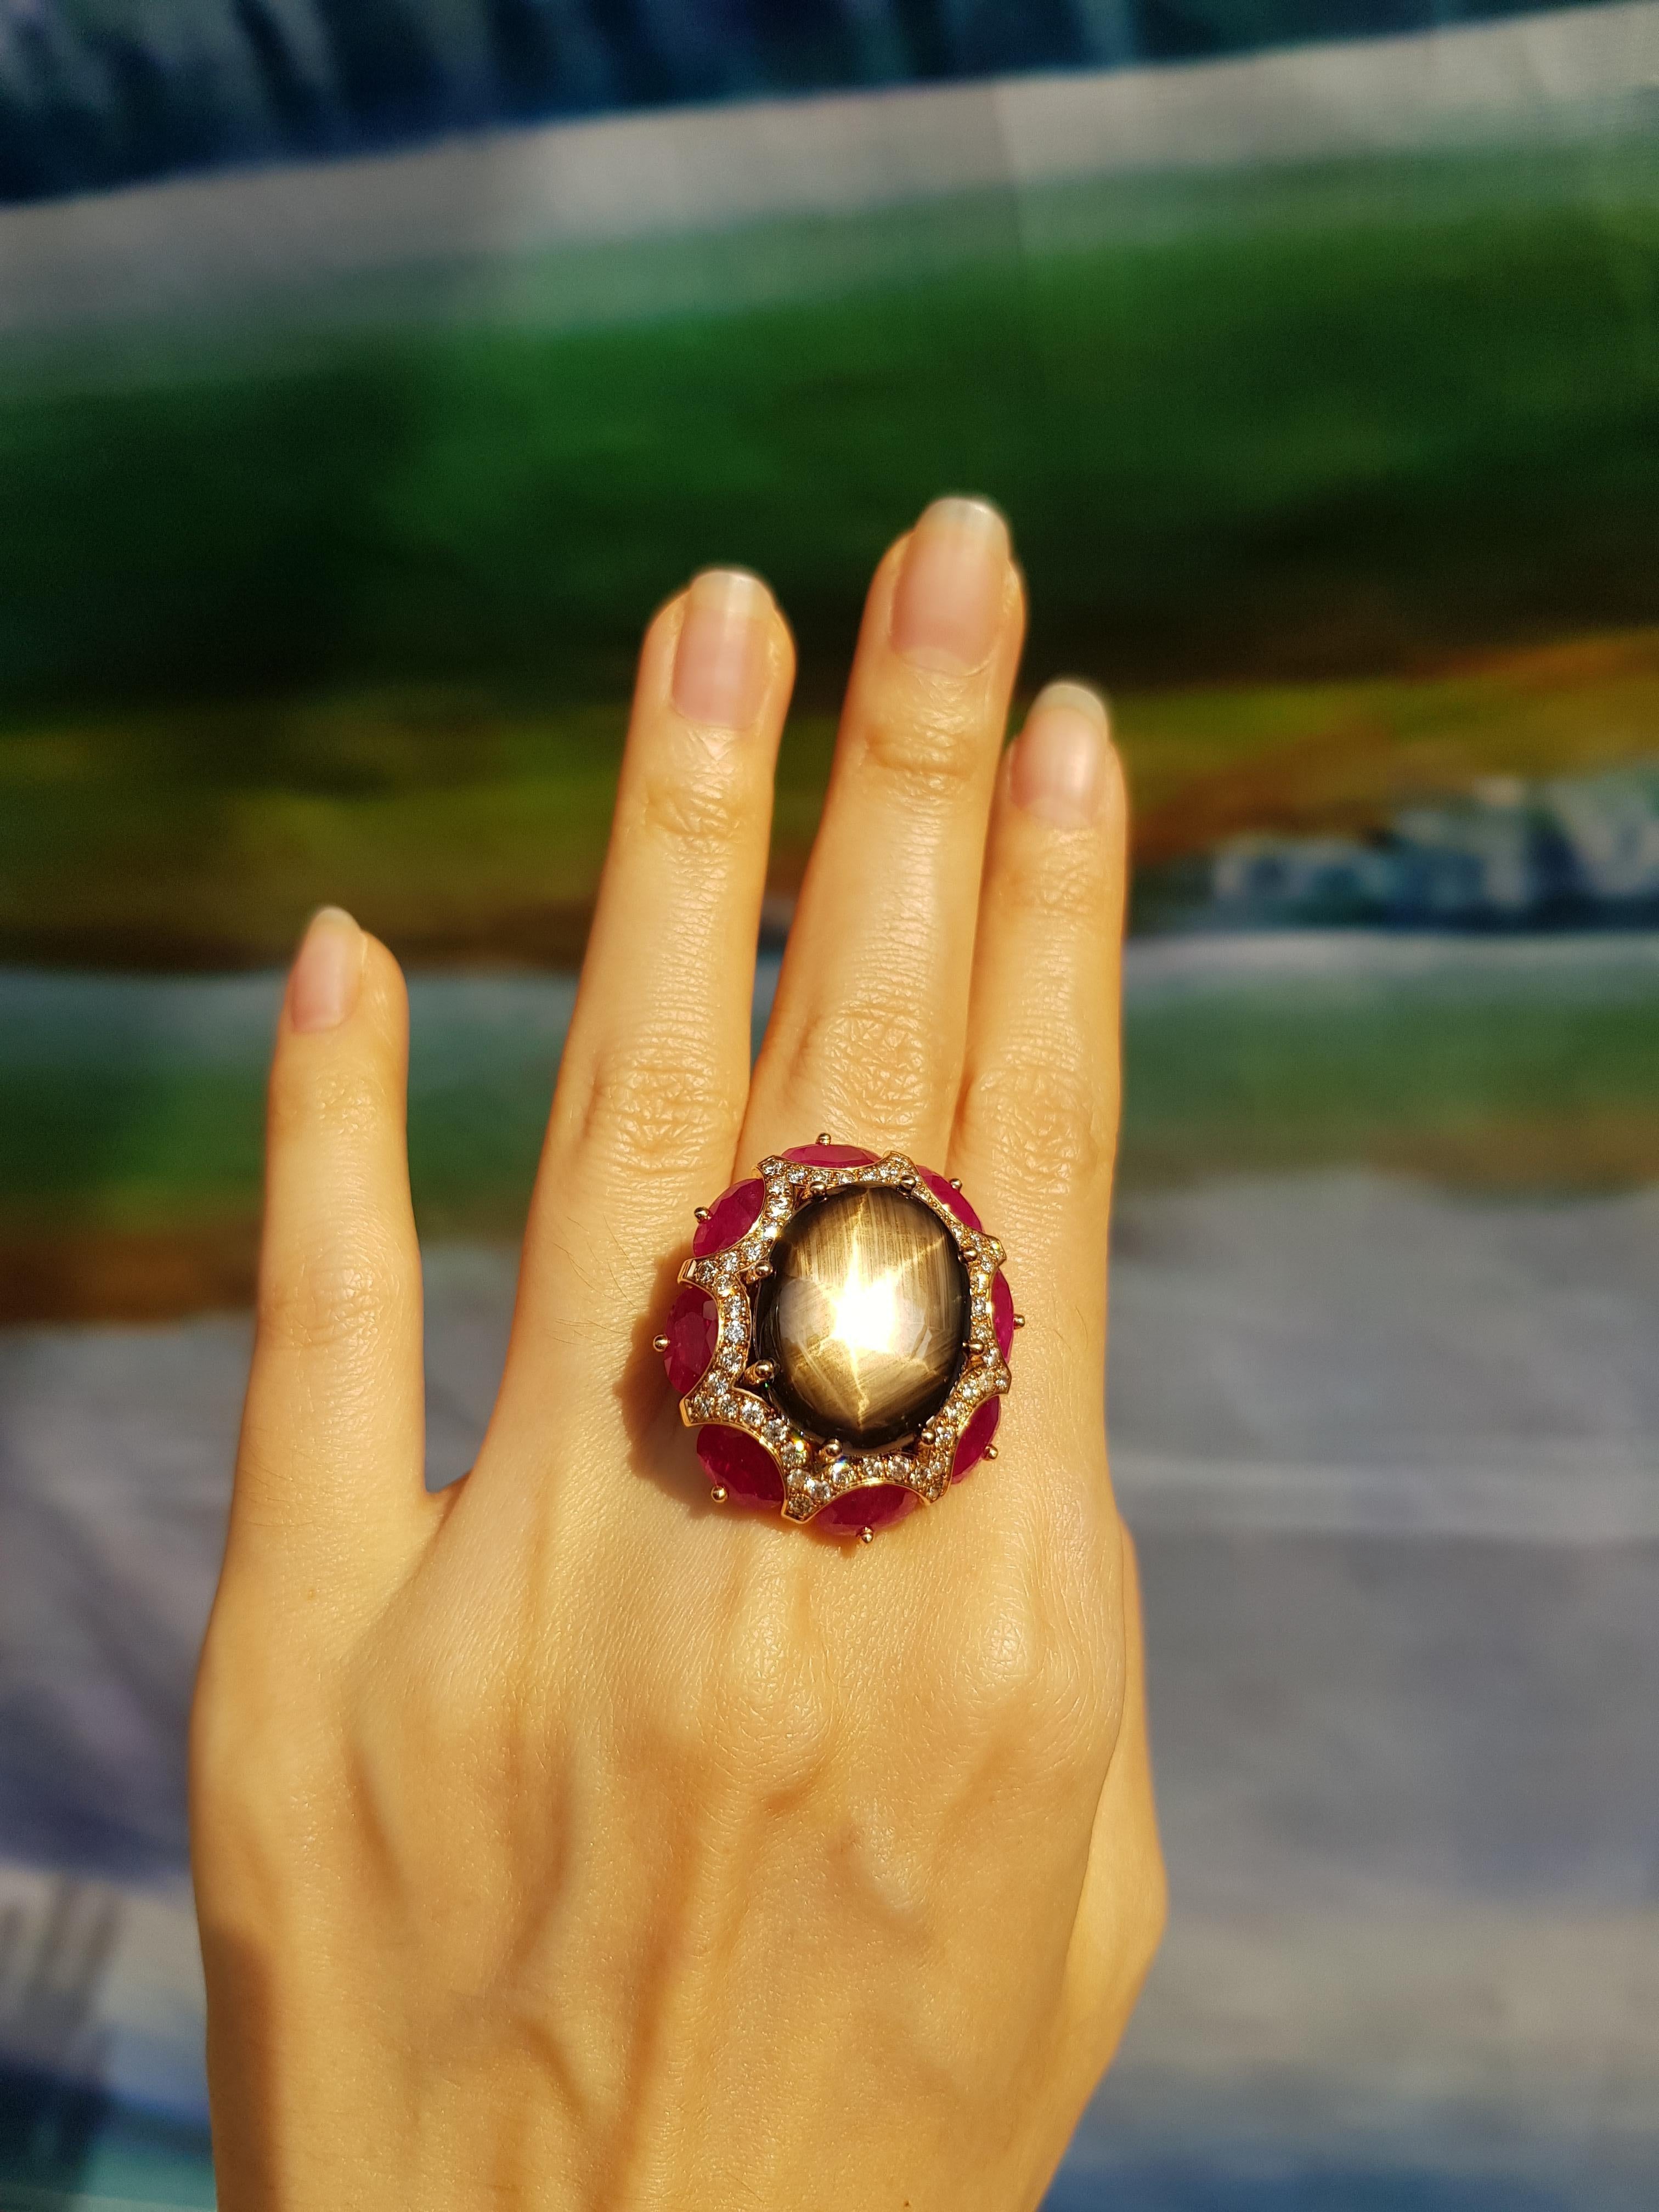 Black Star Sapphire 29.64 carats, Ruby 9.37 crats with Brown Diamond 0.89 carat Ring set in 18 Karat Rose Gold Settings 

Width: 3.5 cm
Length: 4.0 cm 
Ring Size: 54

